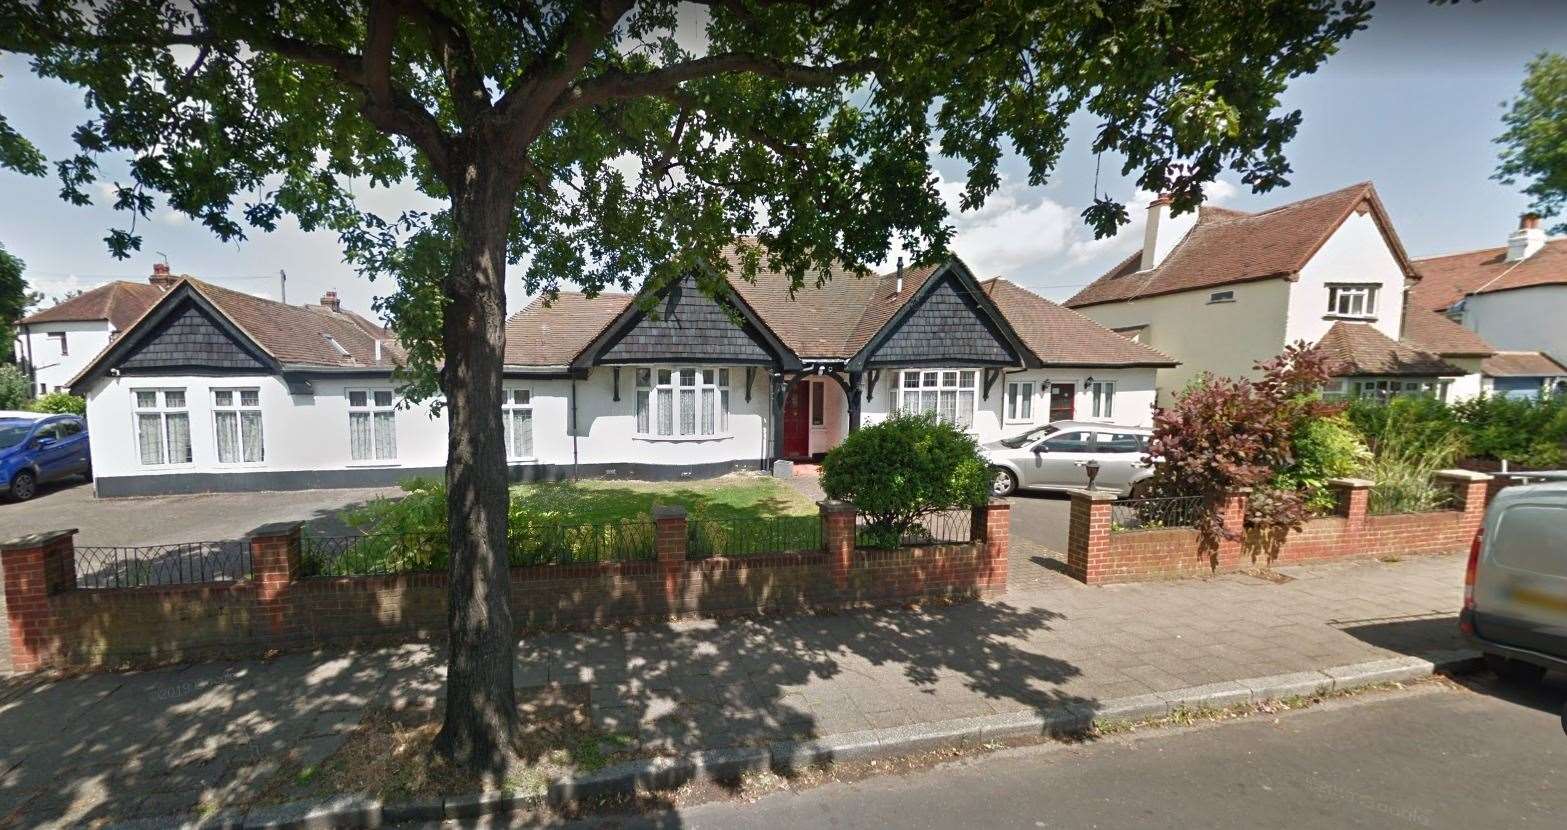 The Spenser Road care home has been placed in special measures. Picture: Google